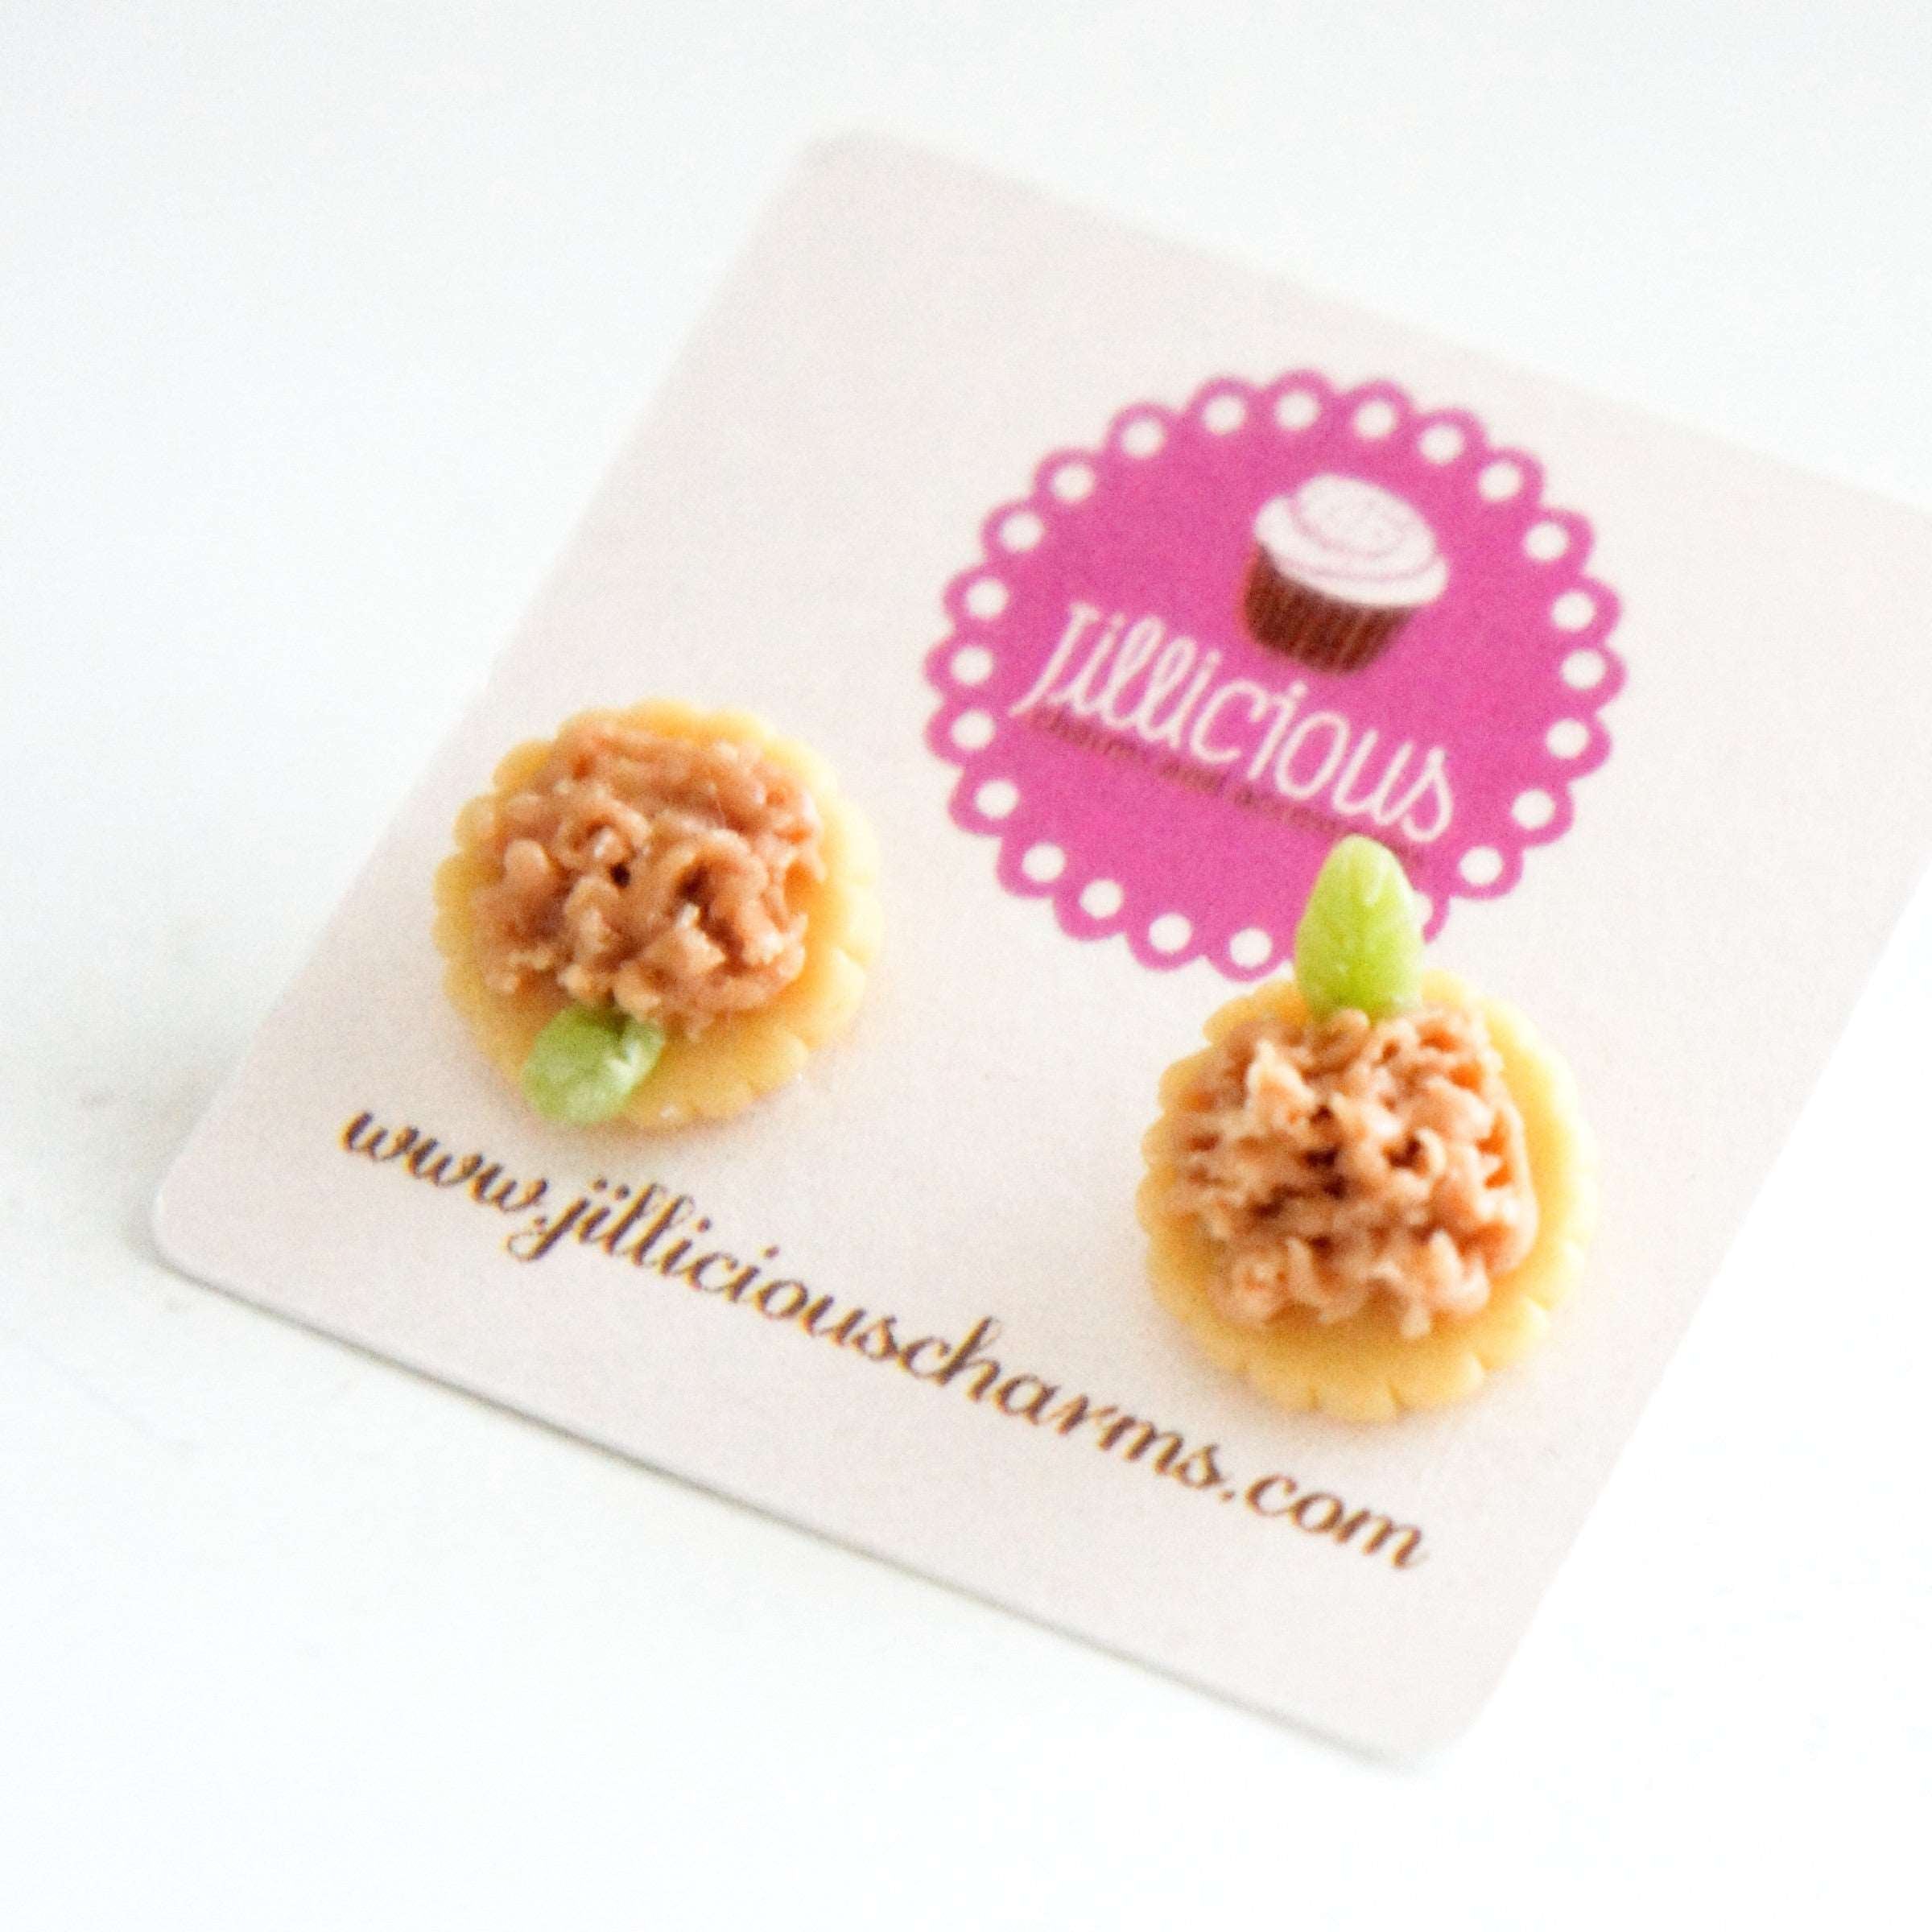 Cheese and Tuna Earrings - Jillicious charms and accessories